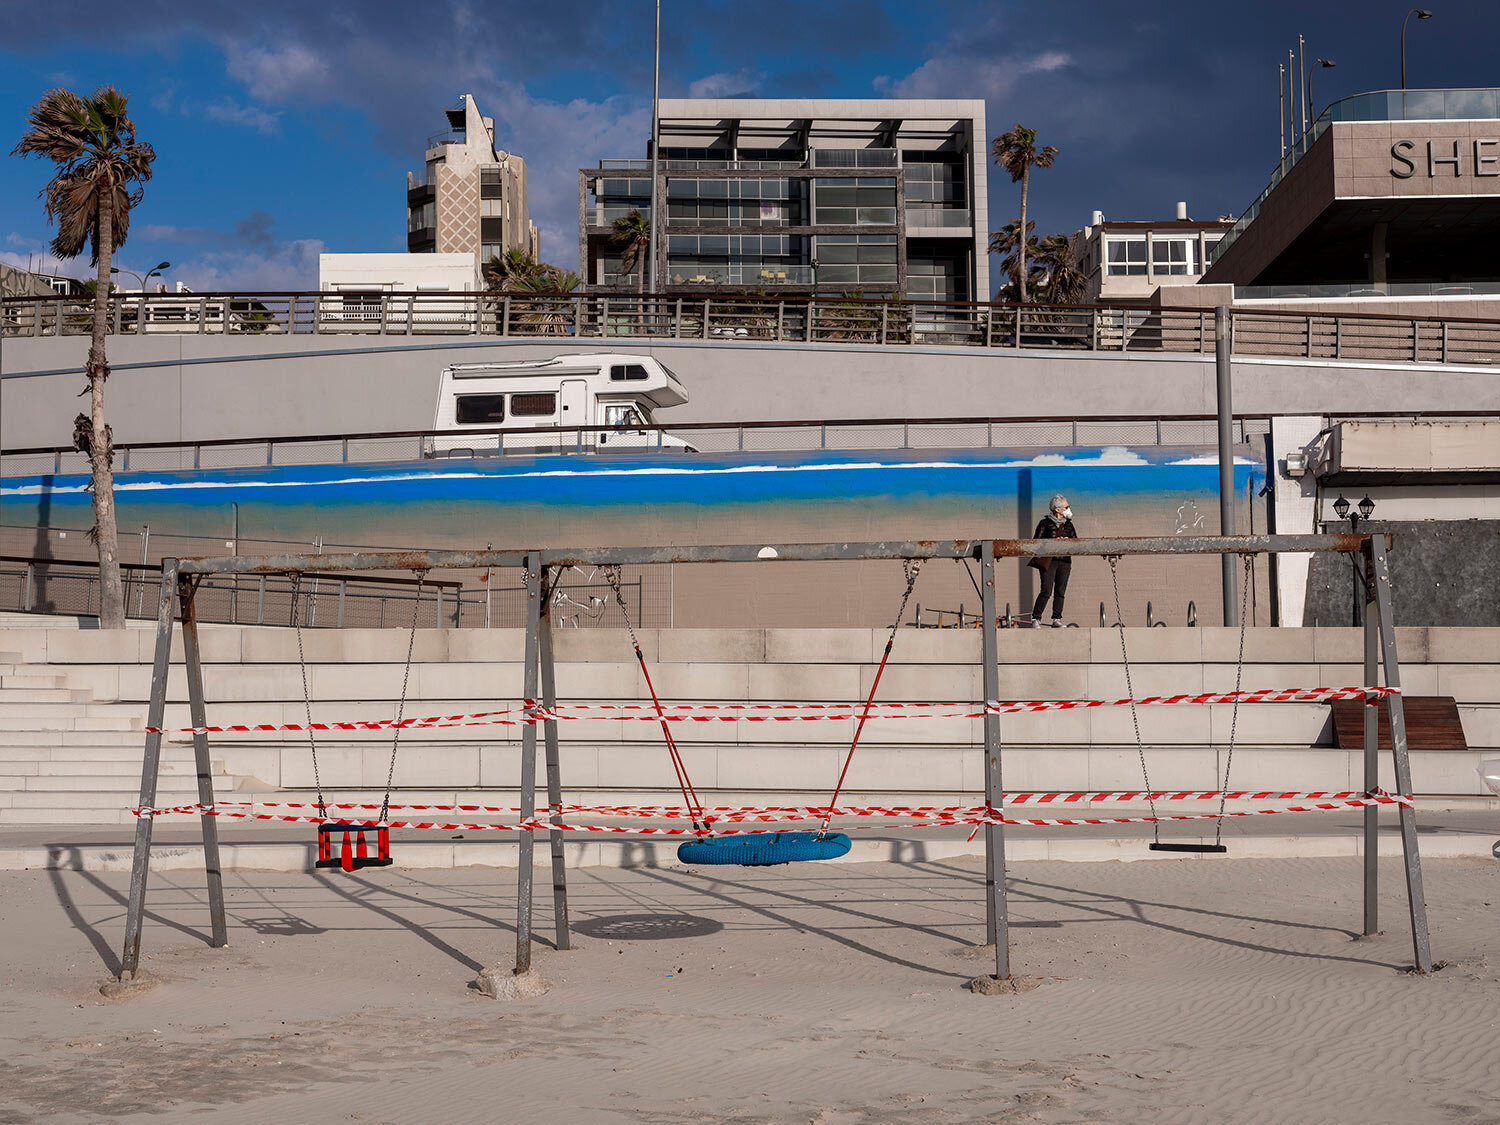  This Thursday, March 19, 2020 photo shows swings at Tel Aviv's beachfront wrapped in tape to prevent public access. (AP Photo/Oded Balilty) 